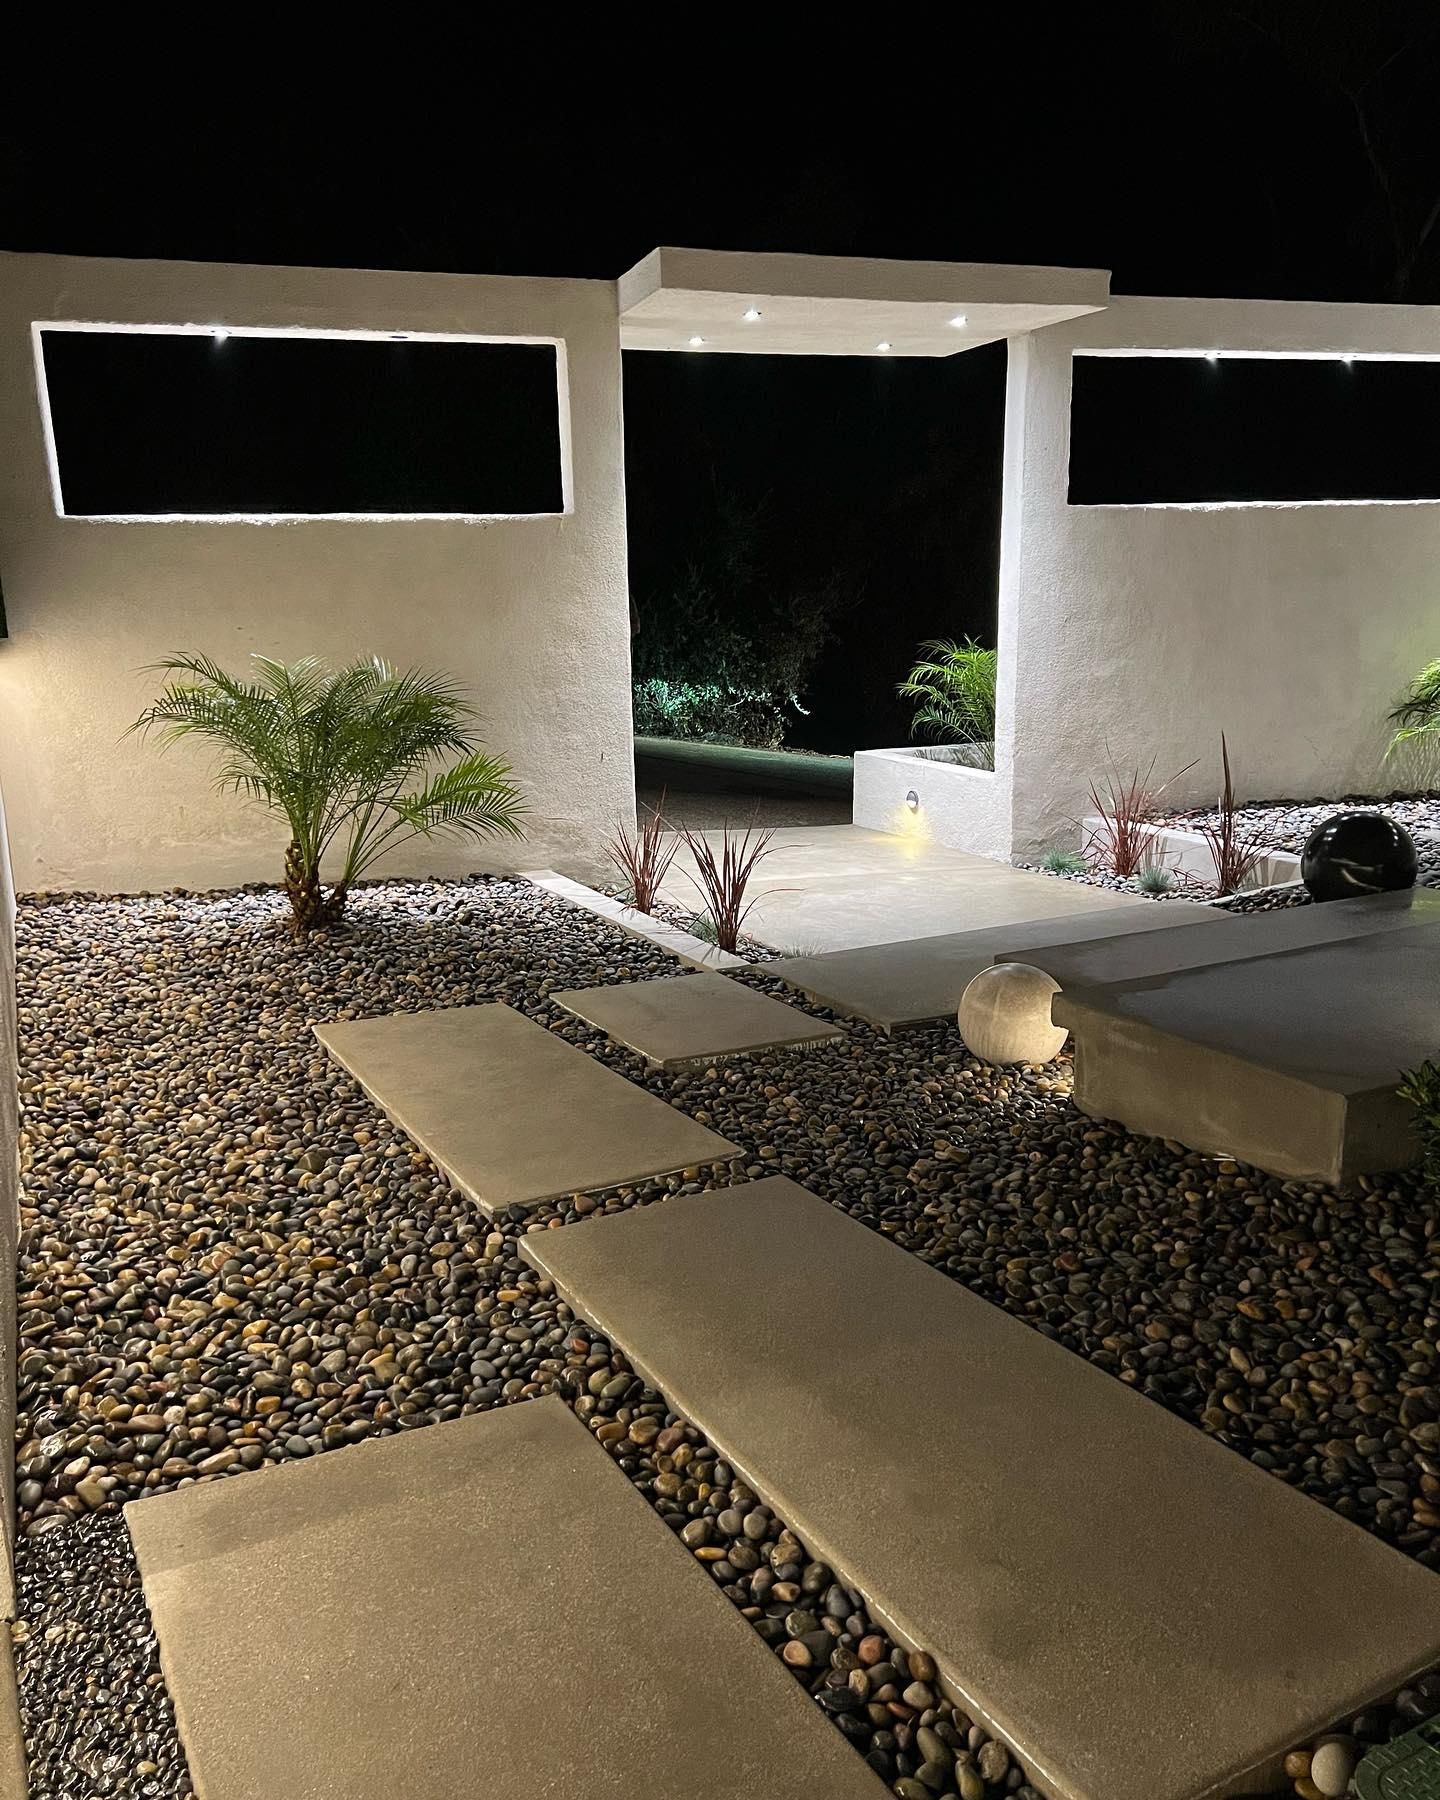 All Photos for Banuelos Landscape in Palisades, CA